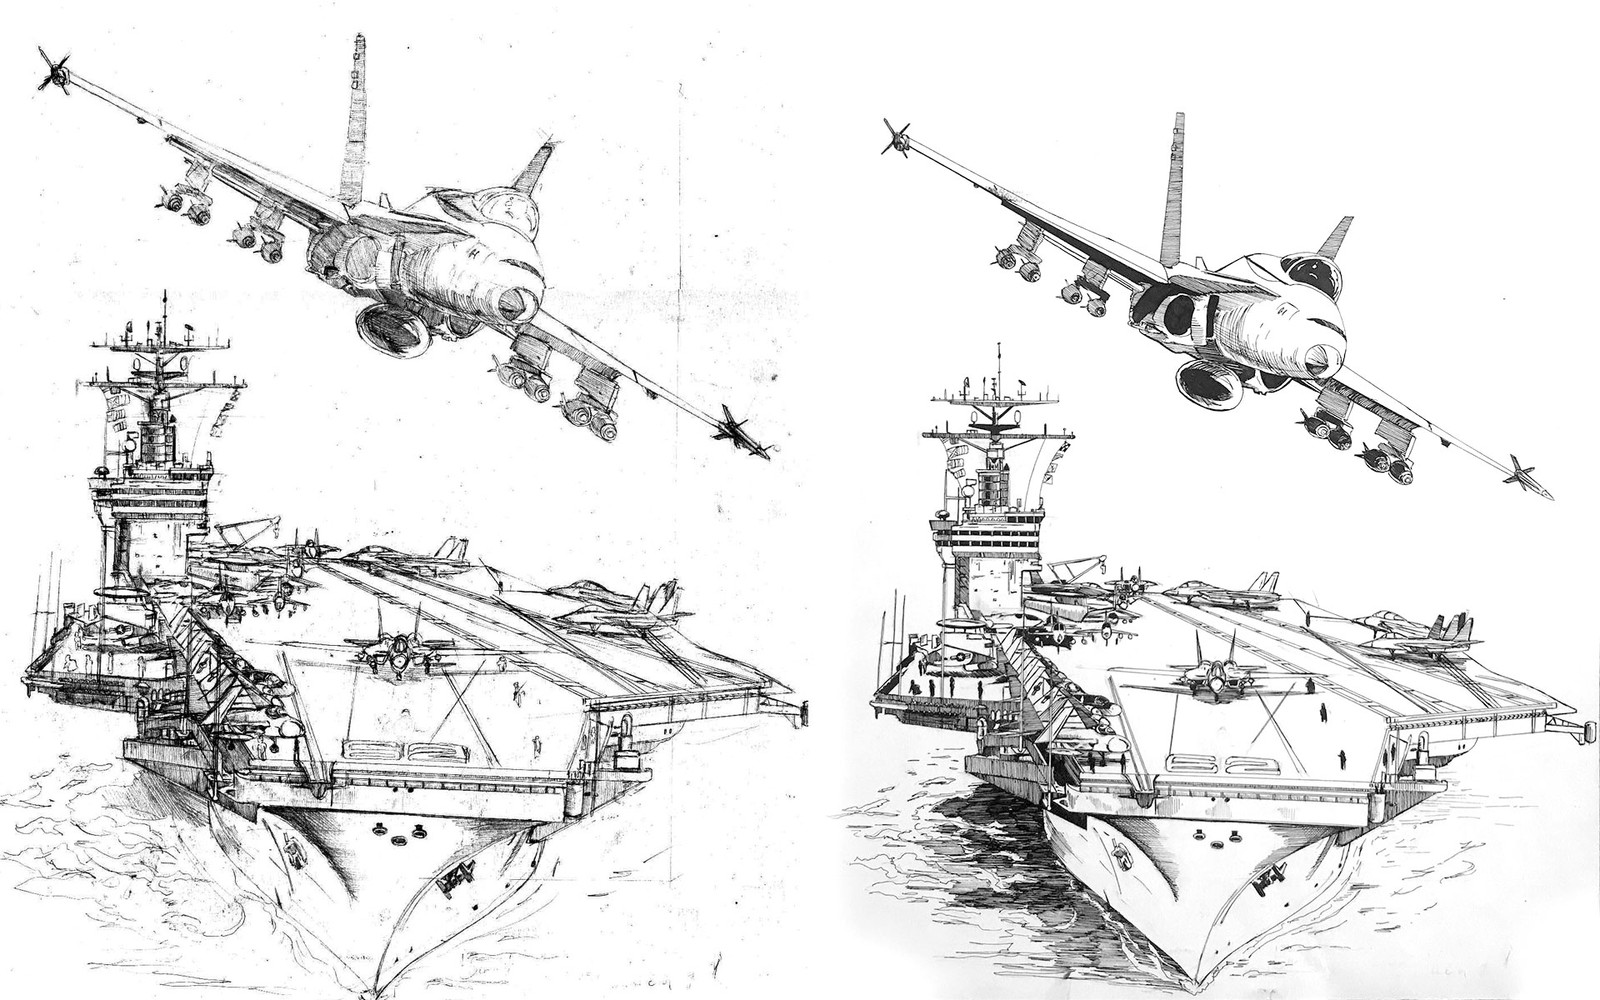 Original pencils and ink. The plane and carrier were drawn on separate sheets at approximately 10"x14"